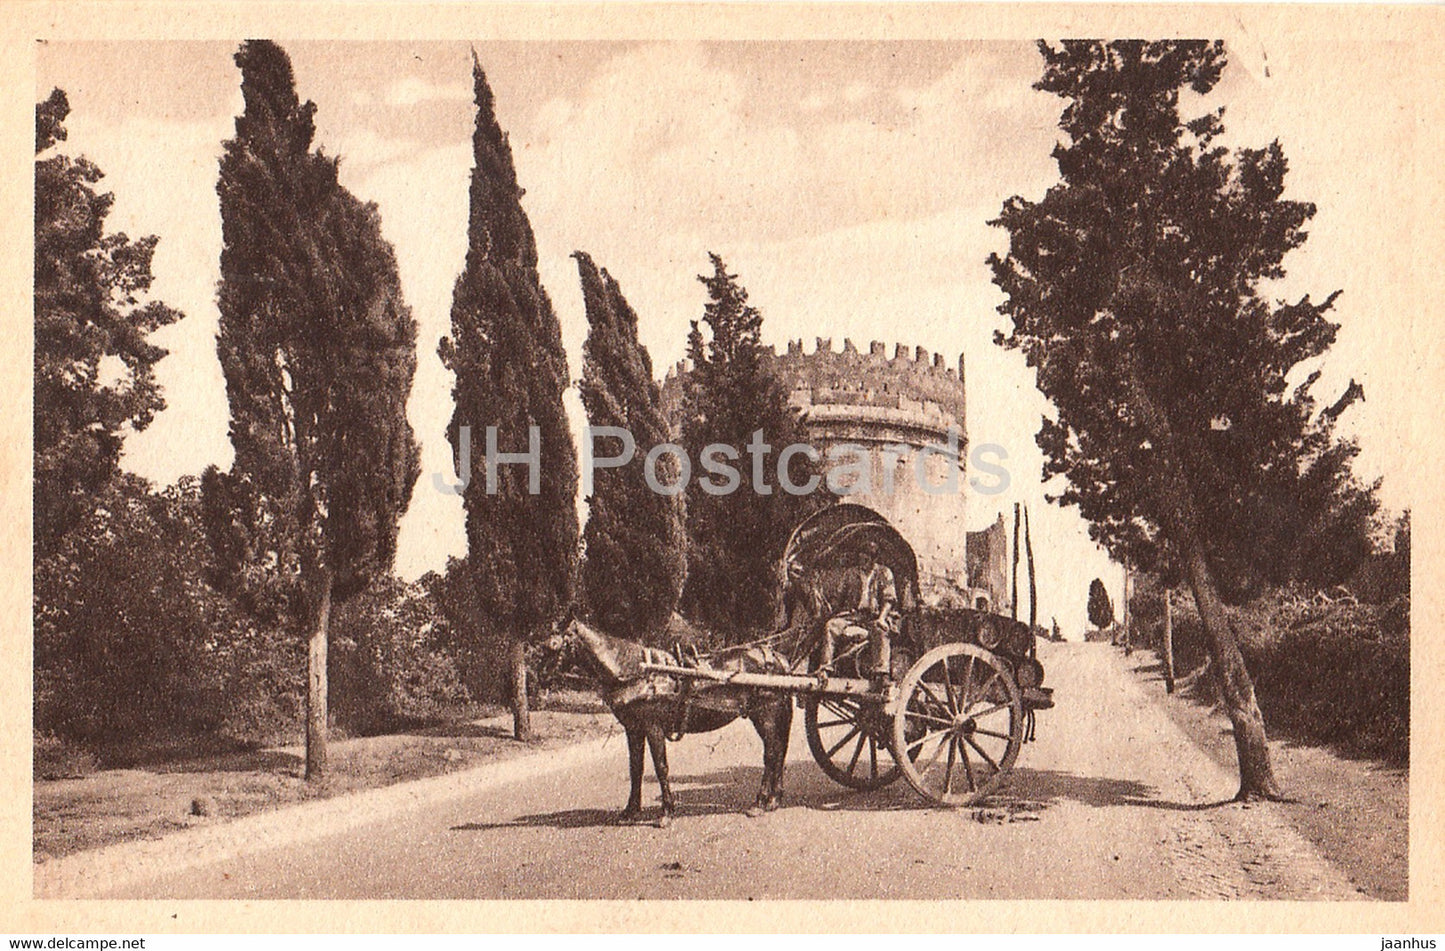 Roma - Rome - Tomb of Cecilia Metella - horse carriage - old postcard - Italy - unused - JH Postcards